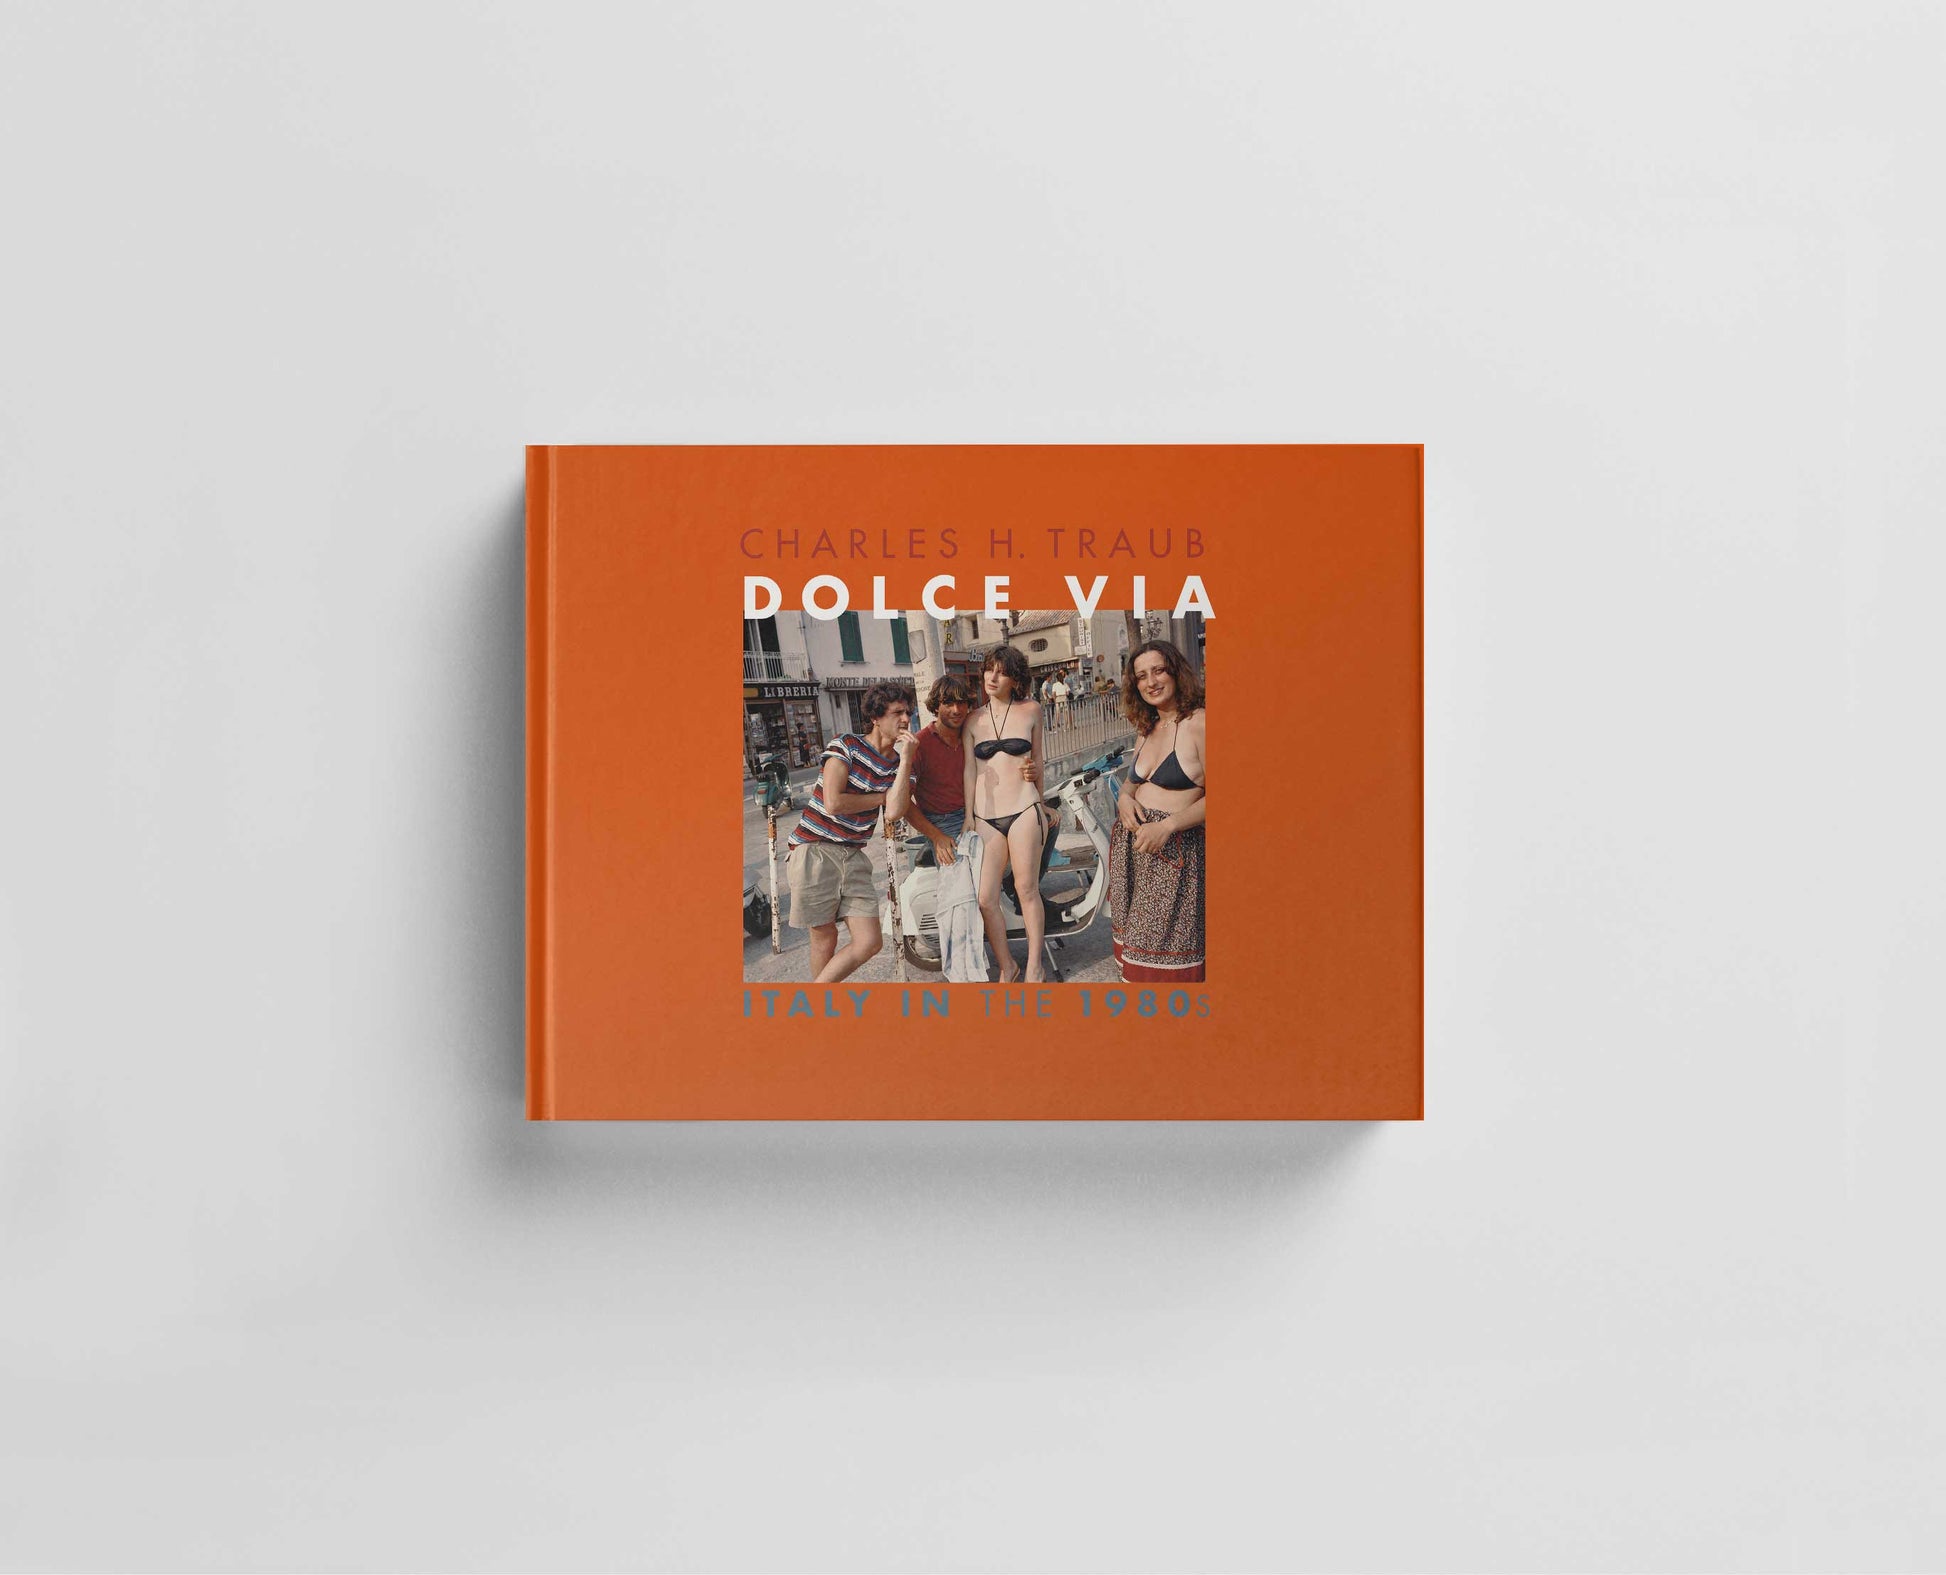 Dolce Via. Italy in the 1980s Default Title